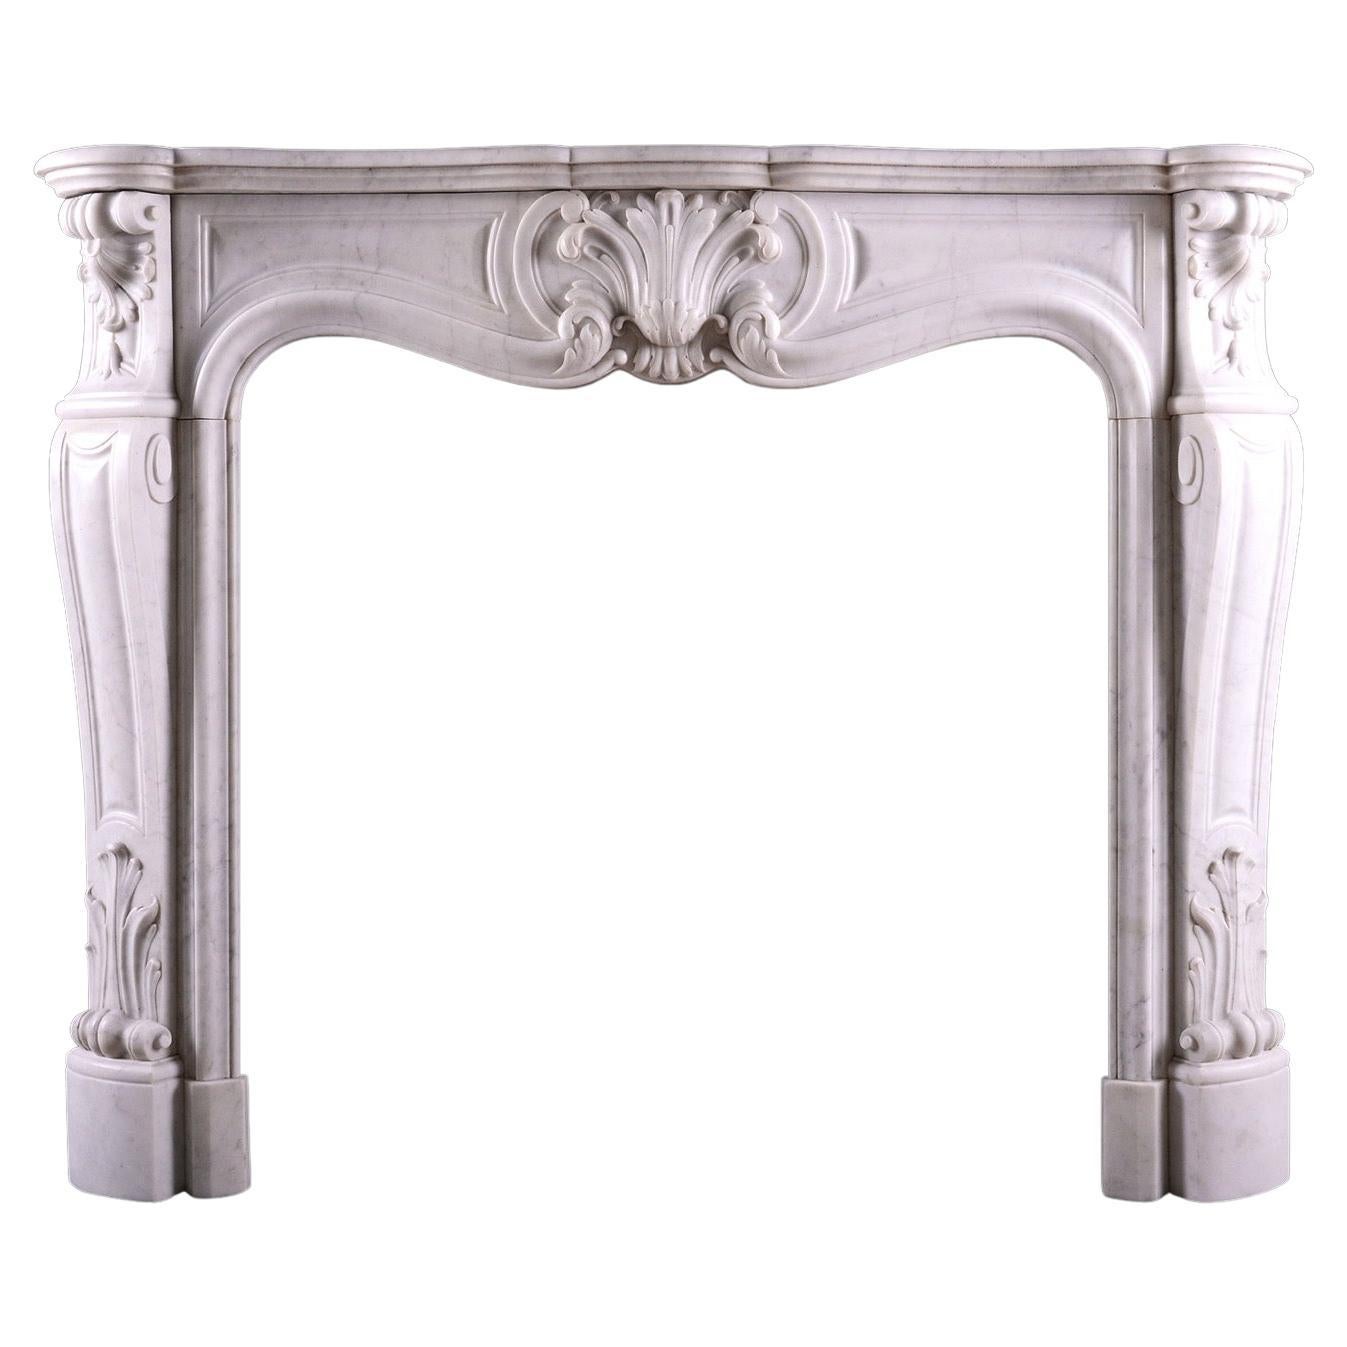 A French Carrara Marble Fireplace in the Louis XV Style